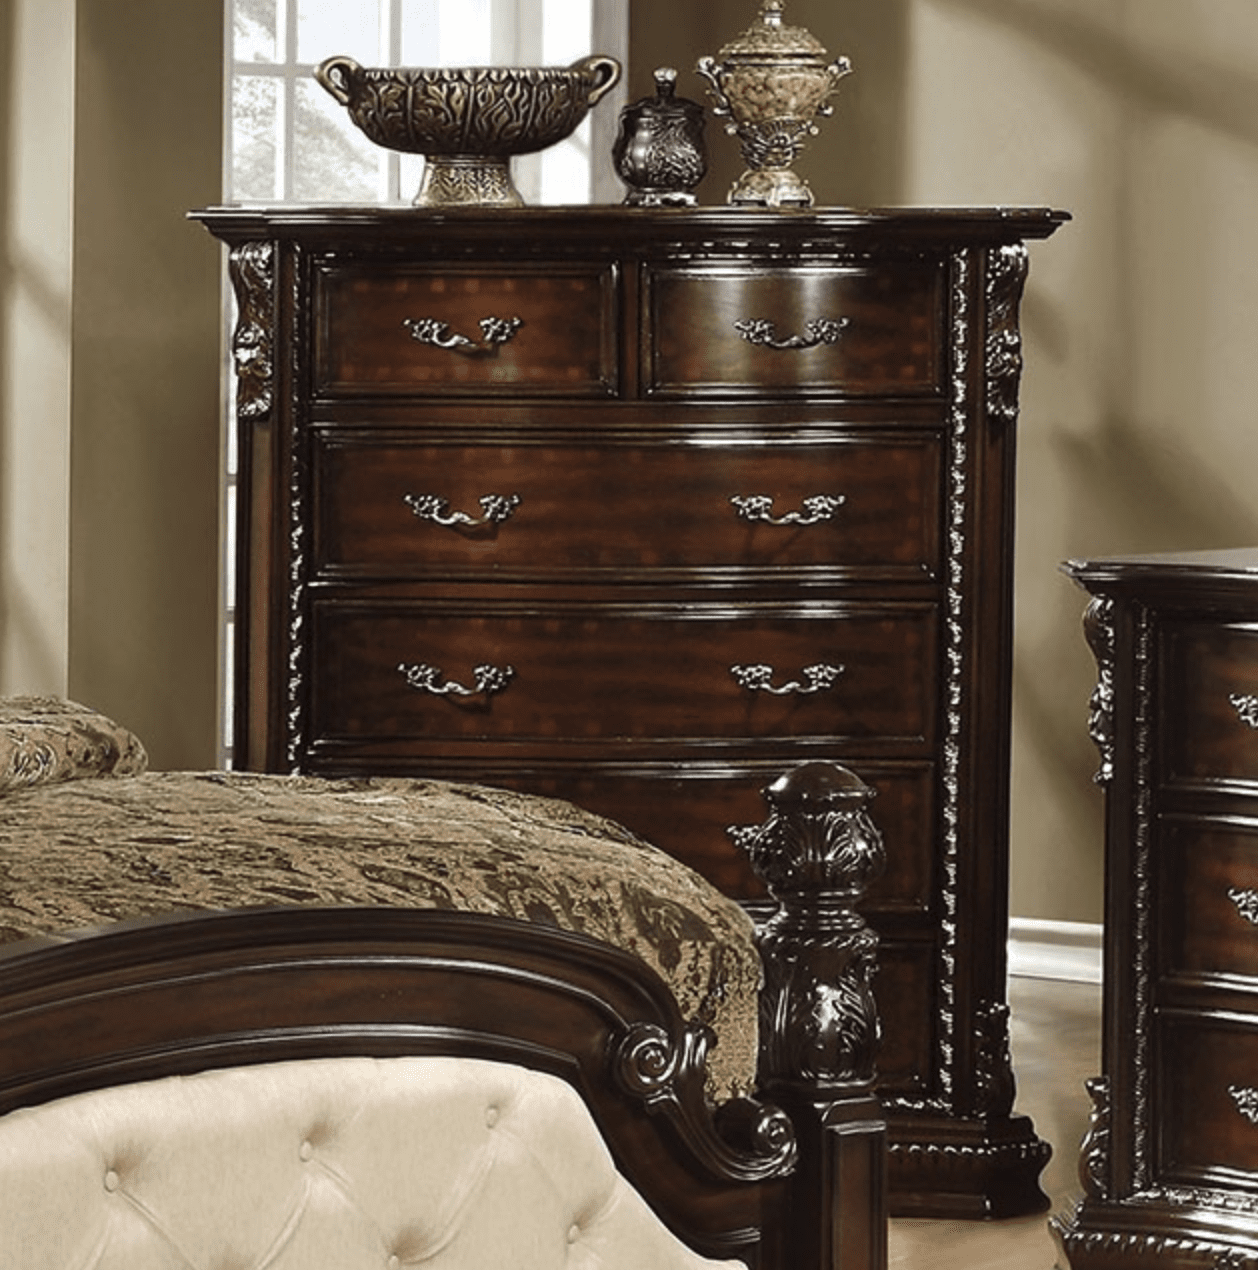 Mandalay Traditional Poster Canopy King Bedroom Set - Brown Cherry